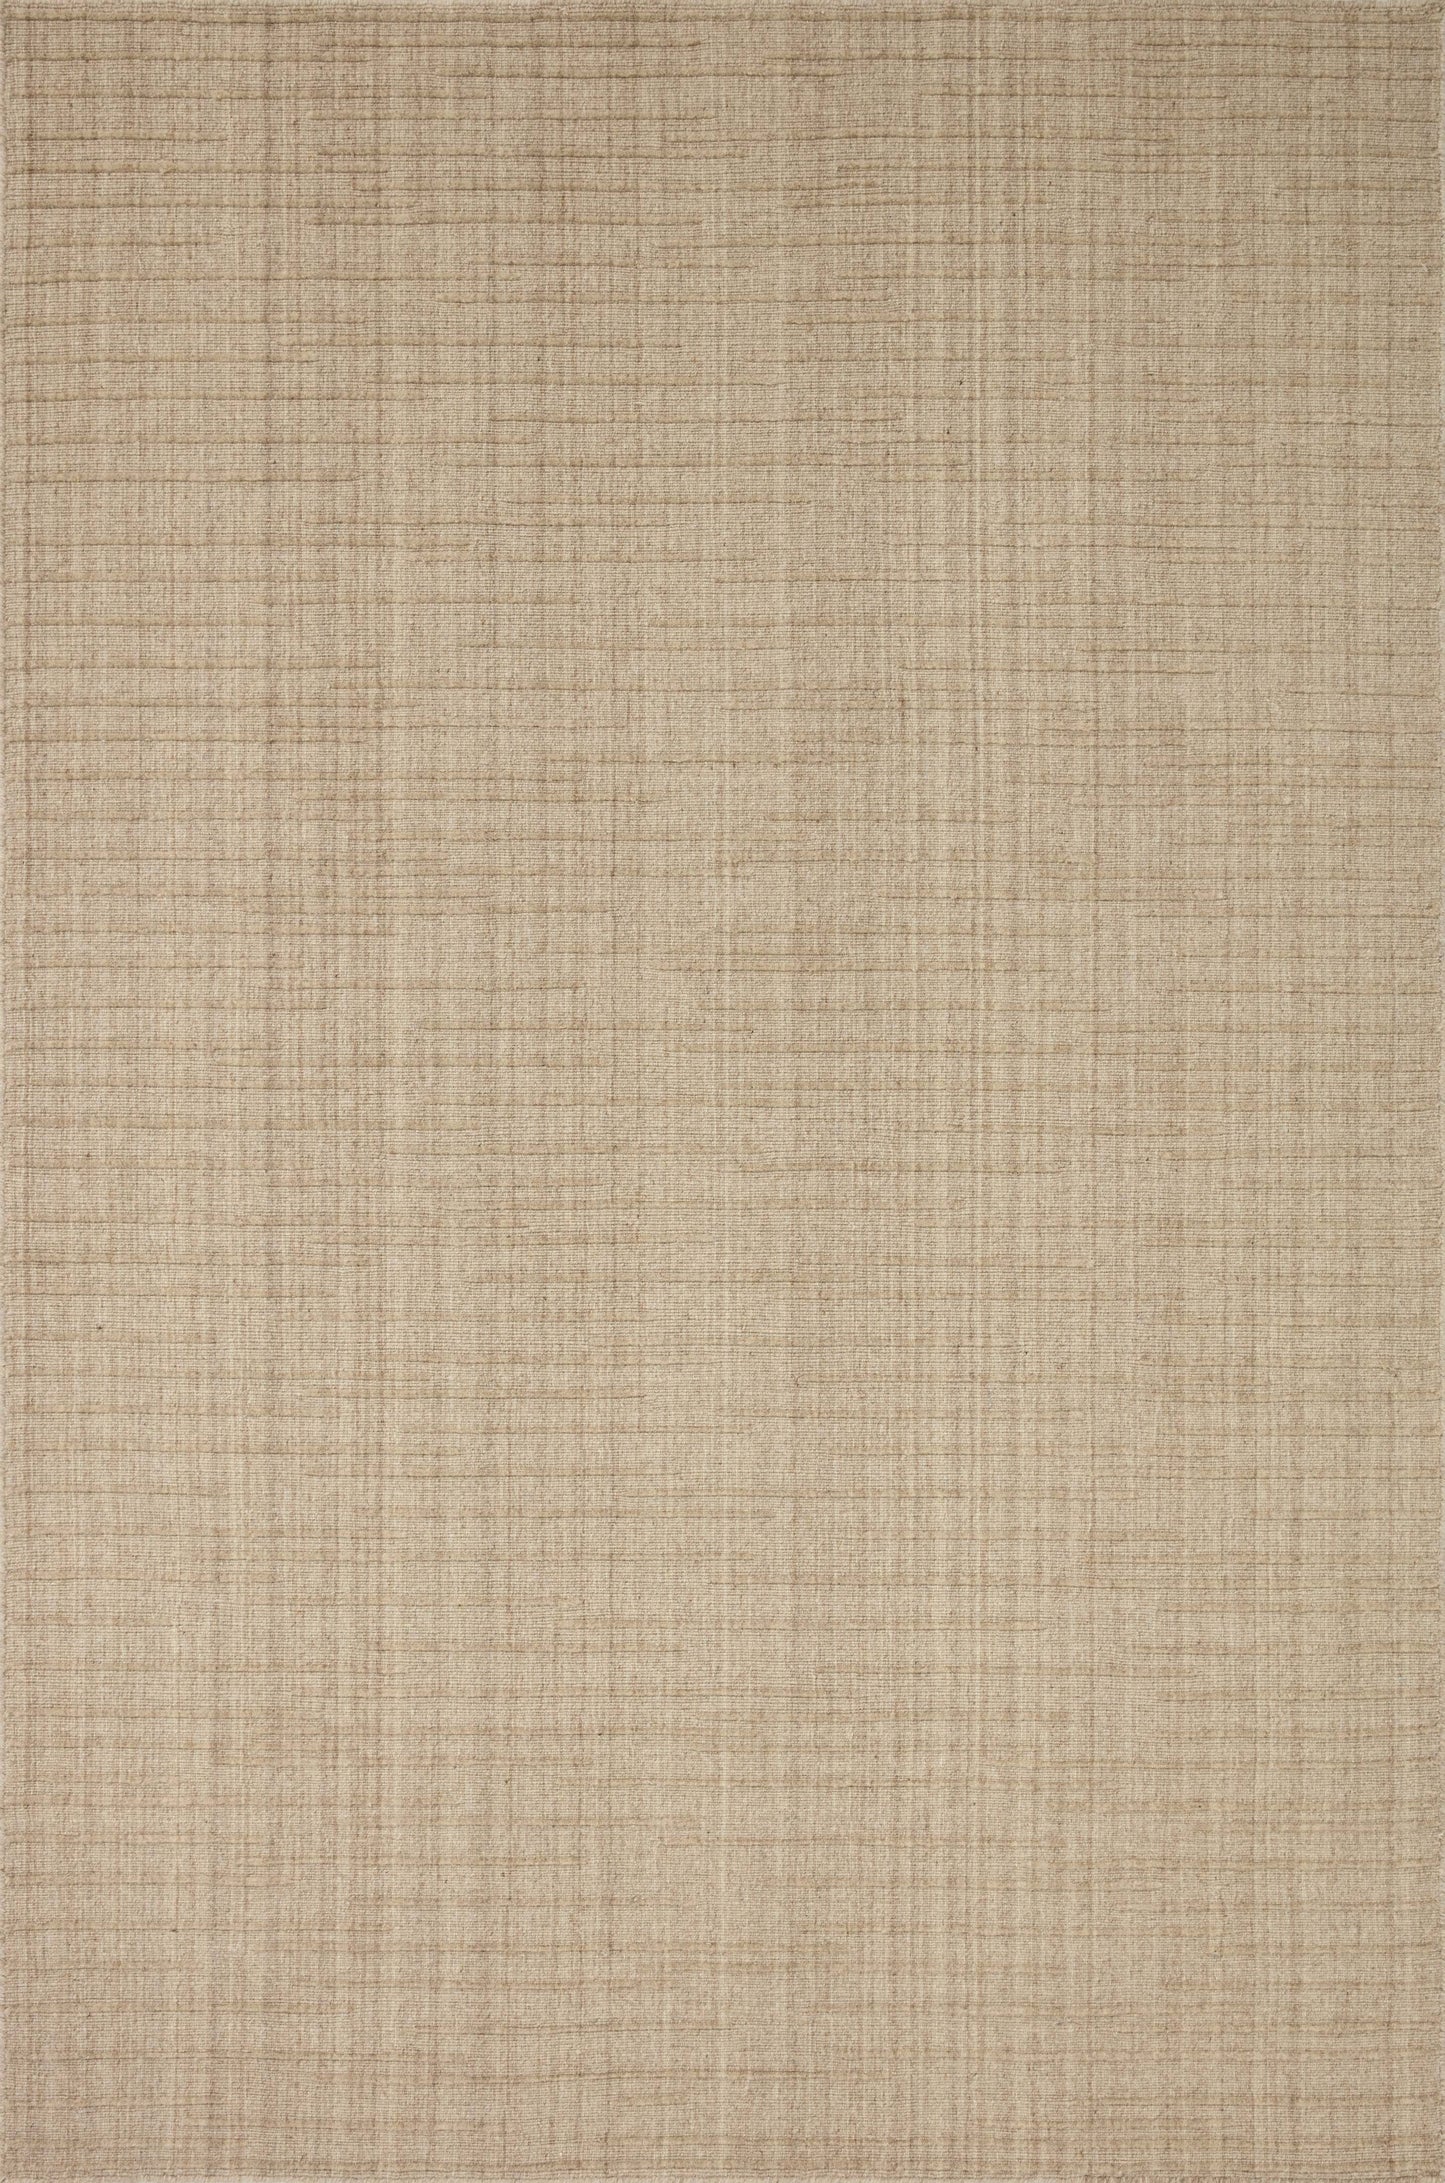 A picture of Loloi's Brooks rug, in style BRO-01, color Oatmeal